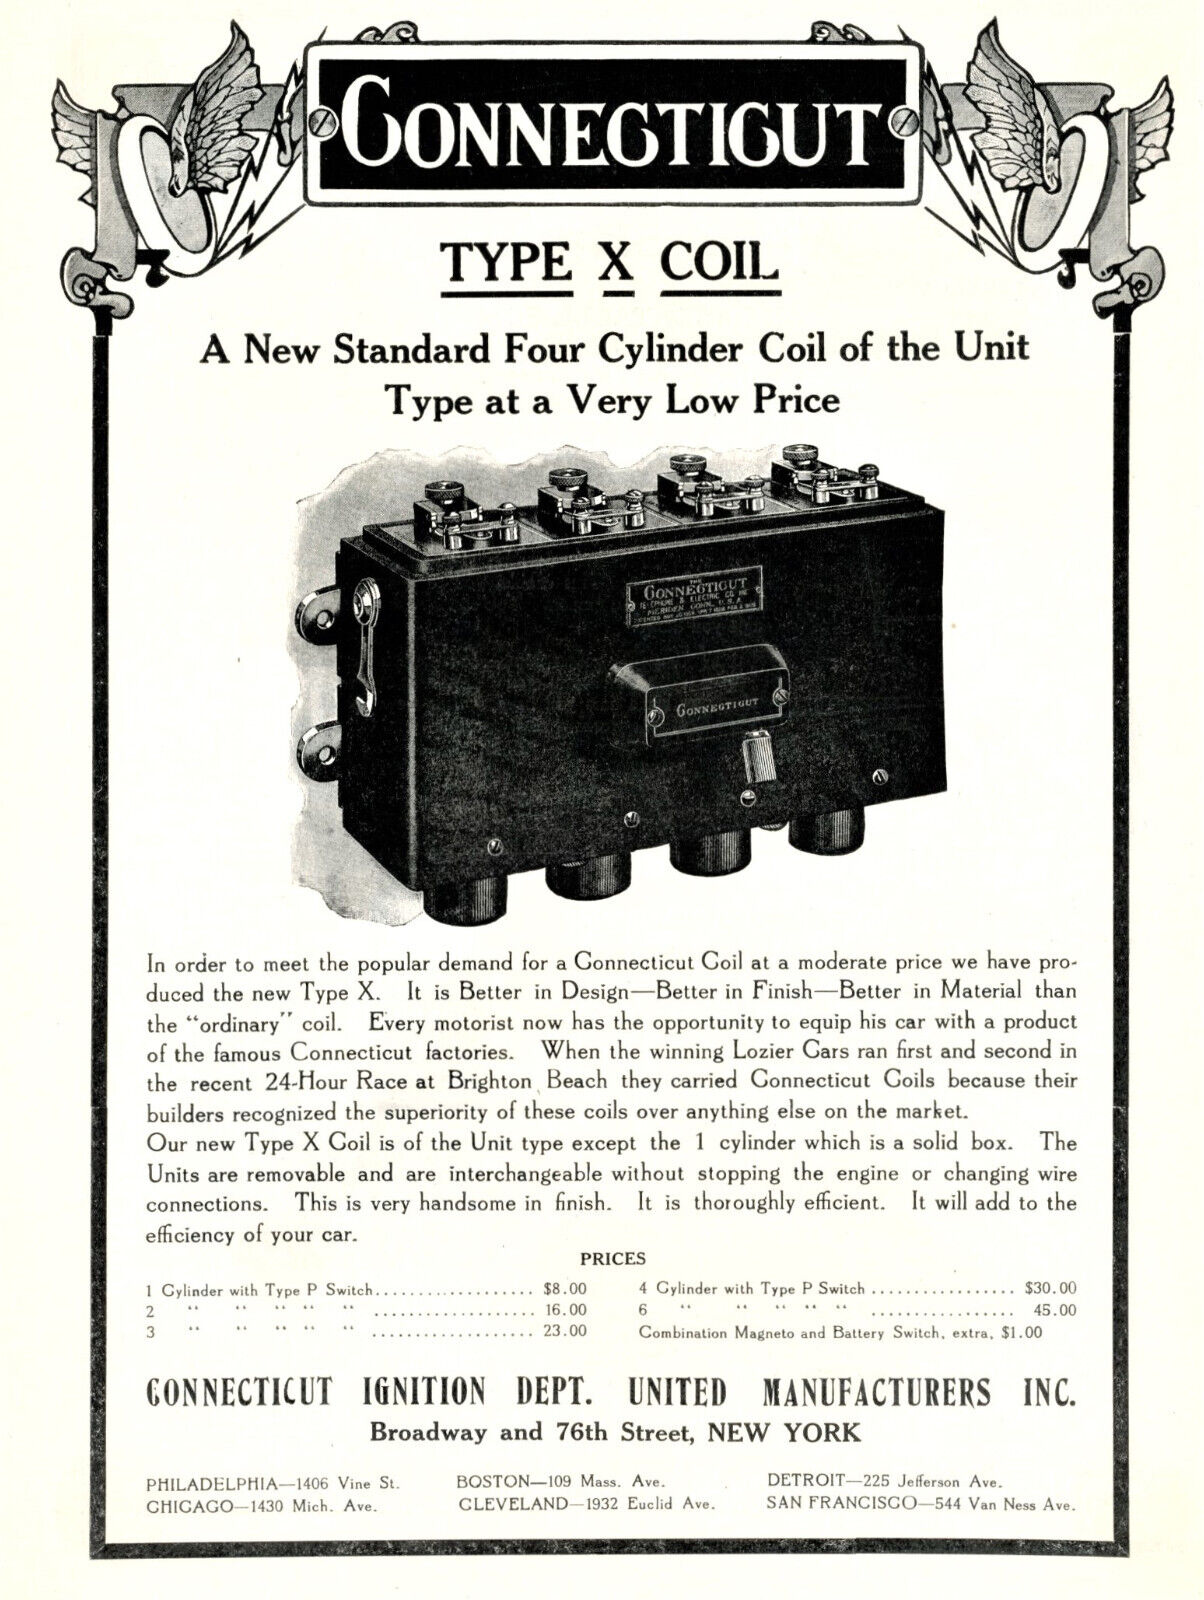 1909 Original Connecticut Type X Coil Ad. Four Cylinder Unit Type. New York City